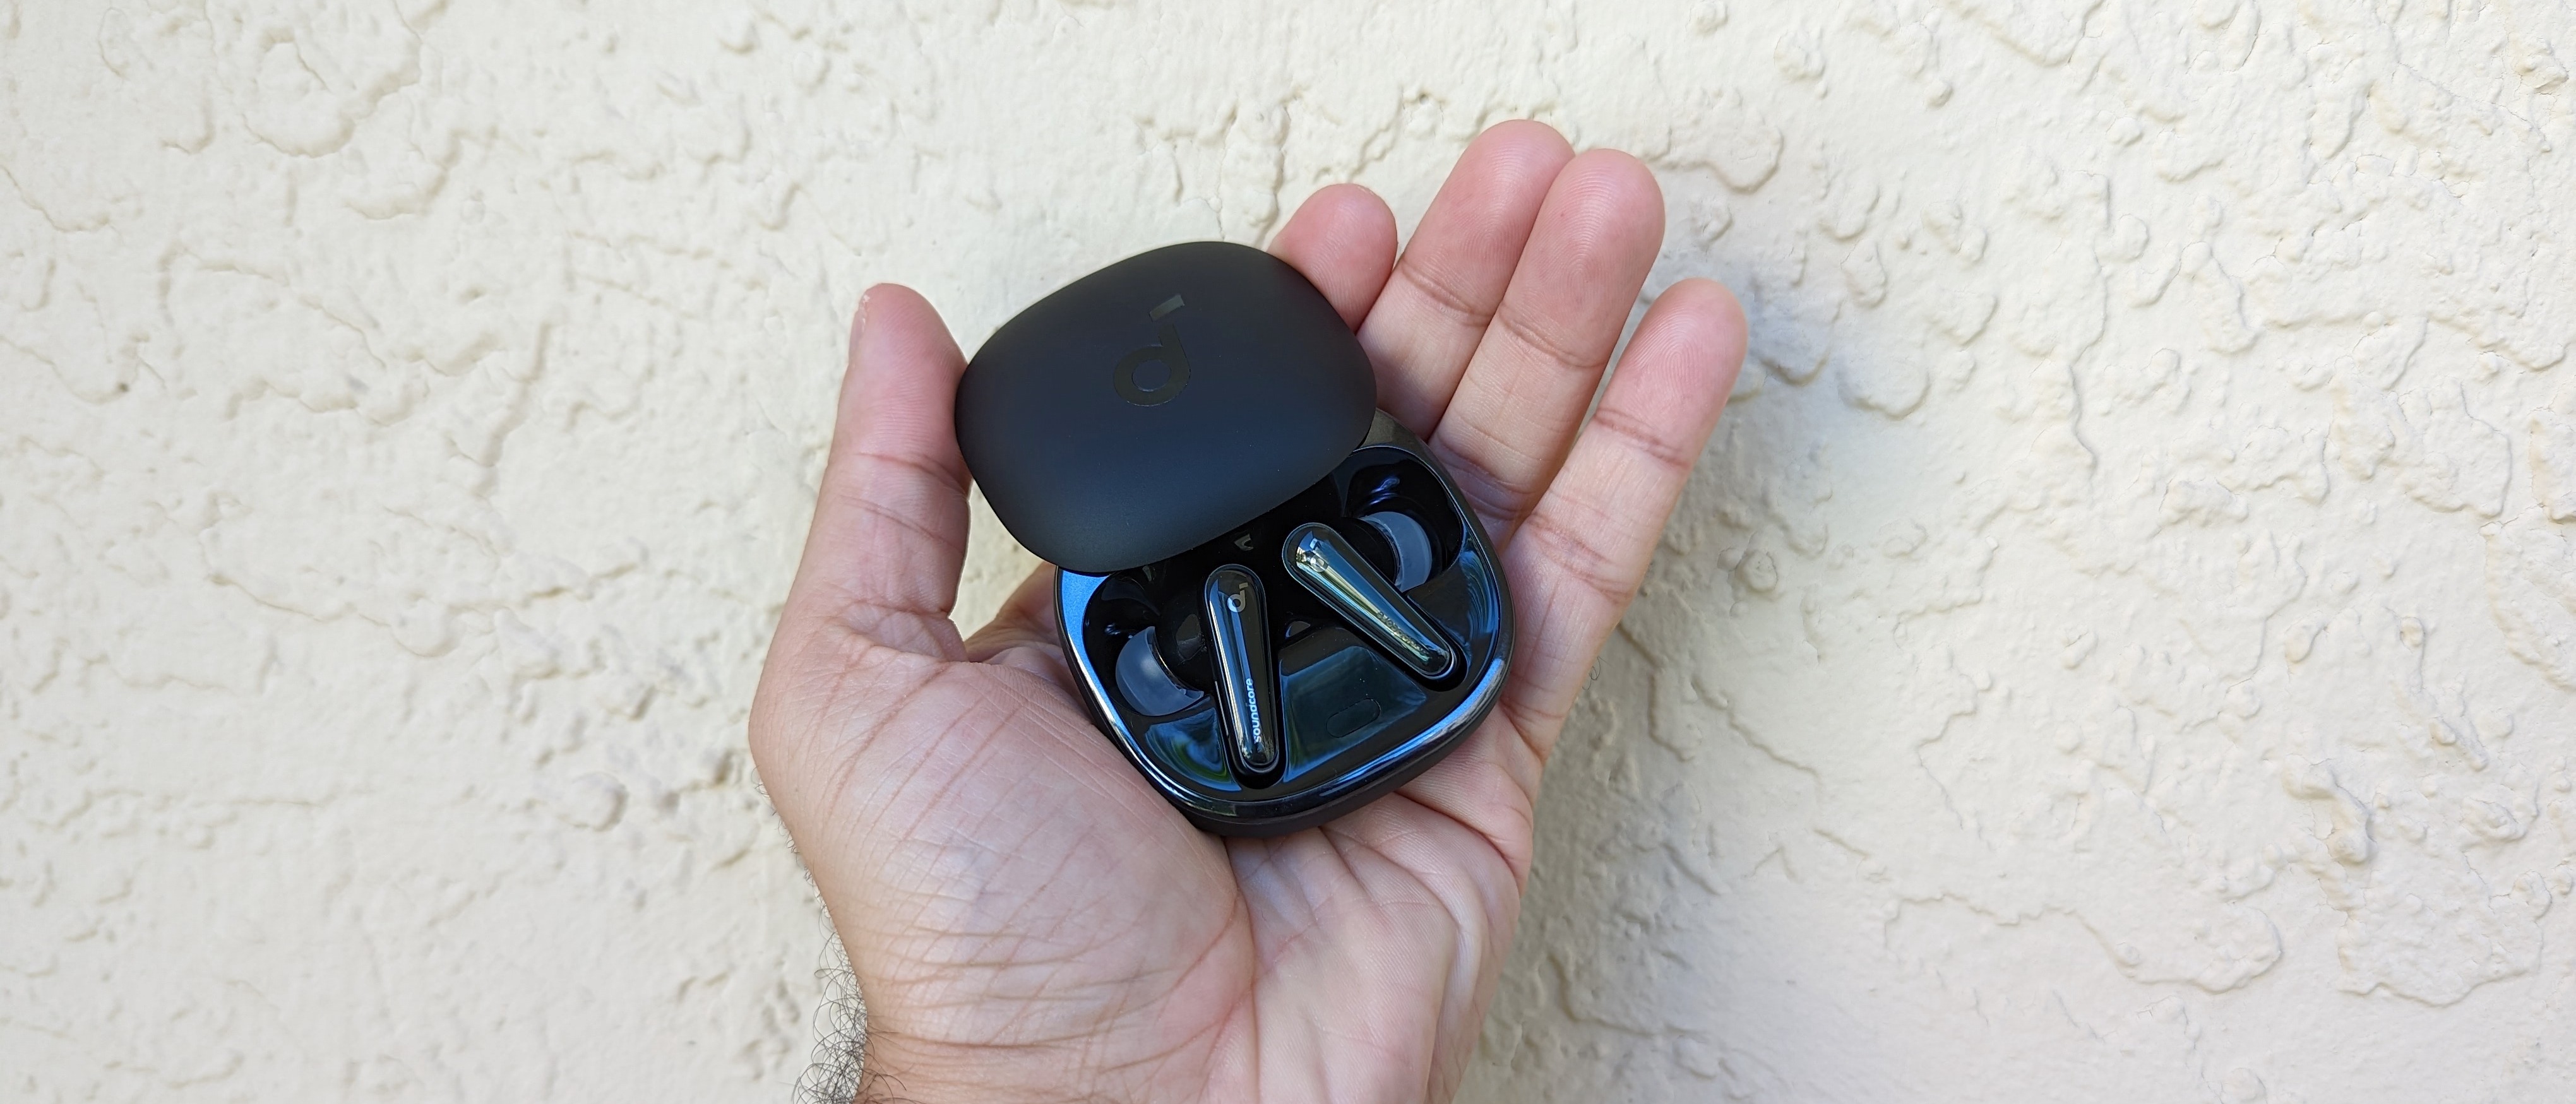 Anker Soundcore Liberty 4 debut with built-in heart rate sensor